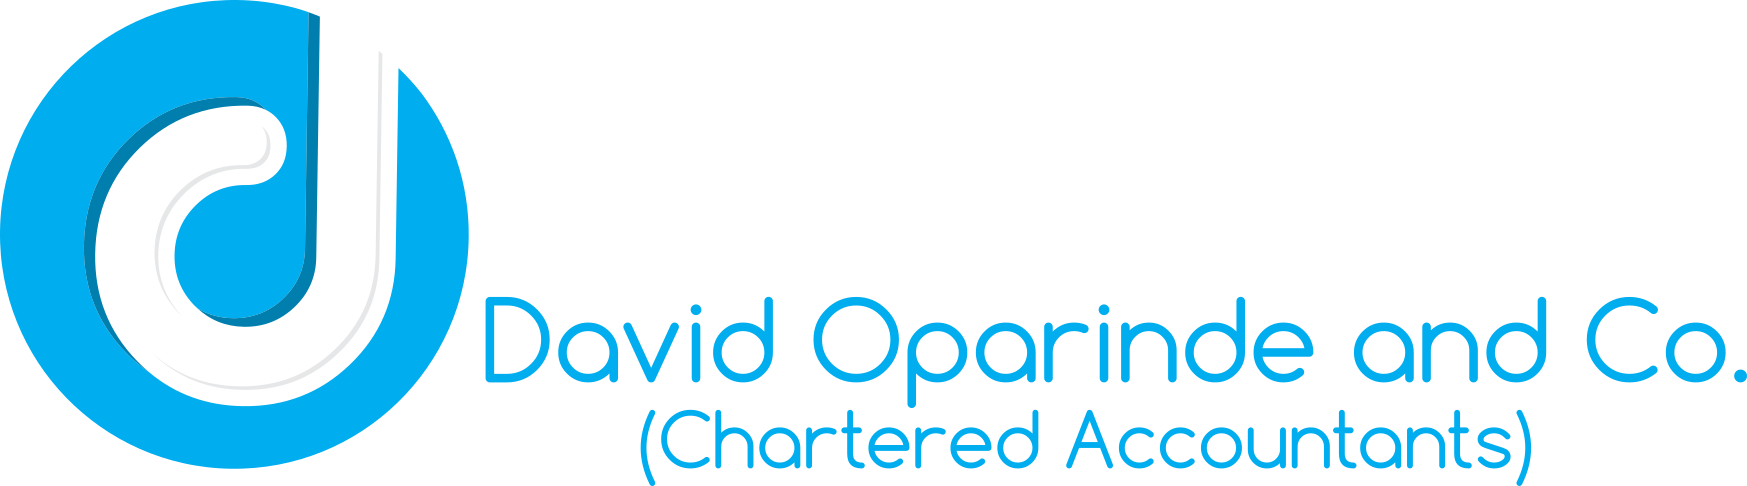 David Oparinde and Co. Chartered Accountant